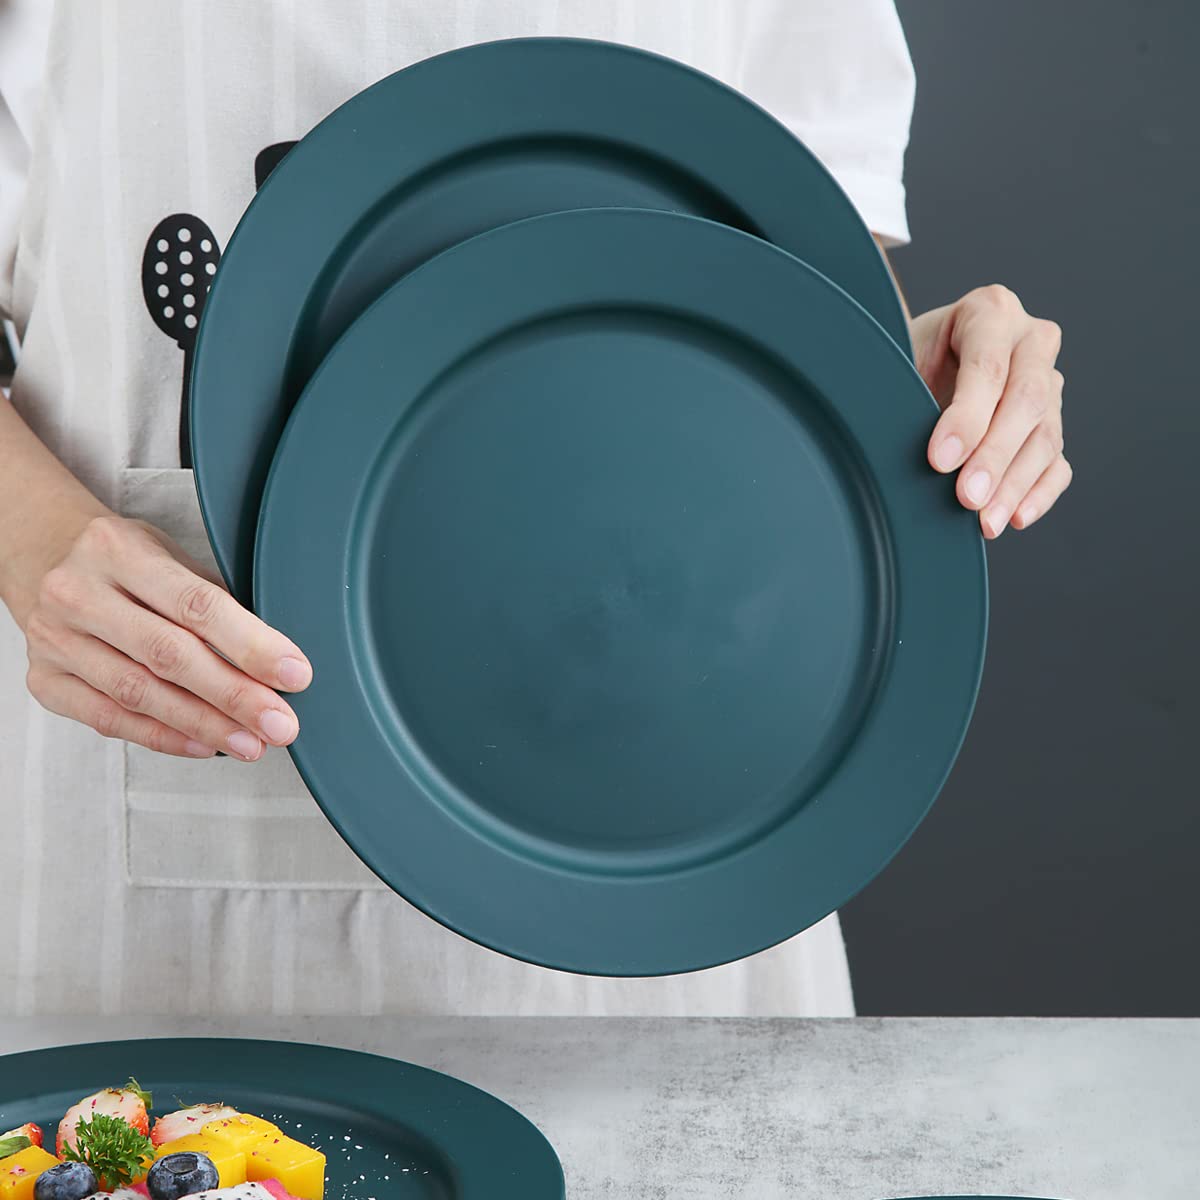 Kyraton 10 Inch Large Plastic Plates 8 Pieces, Dishwasher Safe, Unbreakable And Reusable Light Weight Dinner Plates Microwave Safe BPA Free (Dark Green)